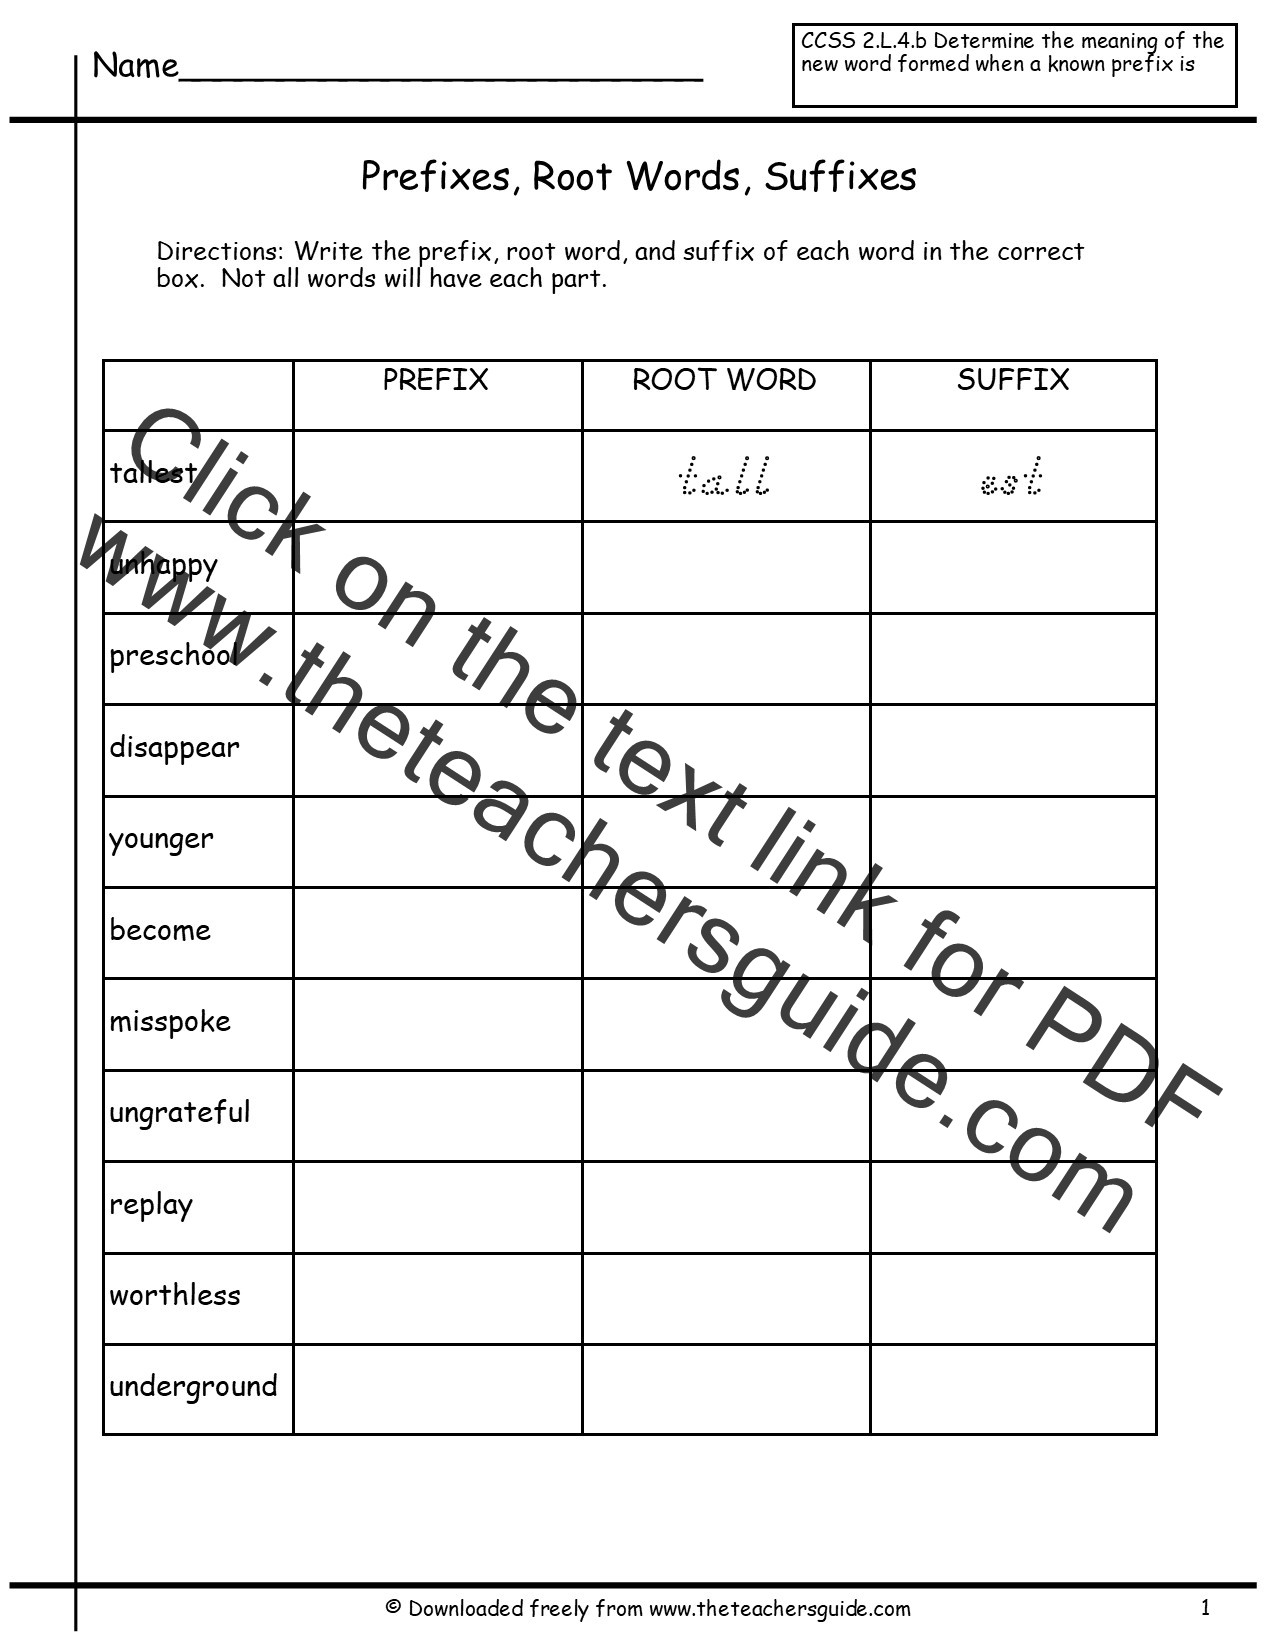 Root Words Worksheet Pdf Free Prefixes and Suffixes Worksheets From the Teacher S Guide